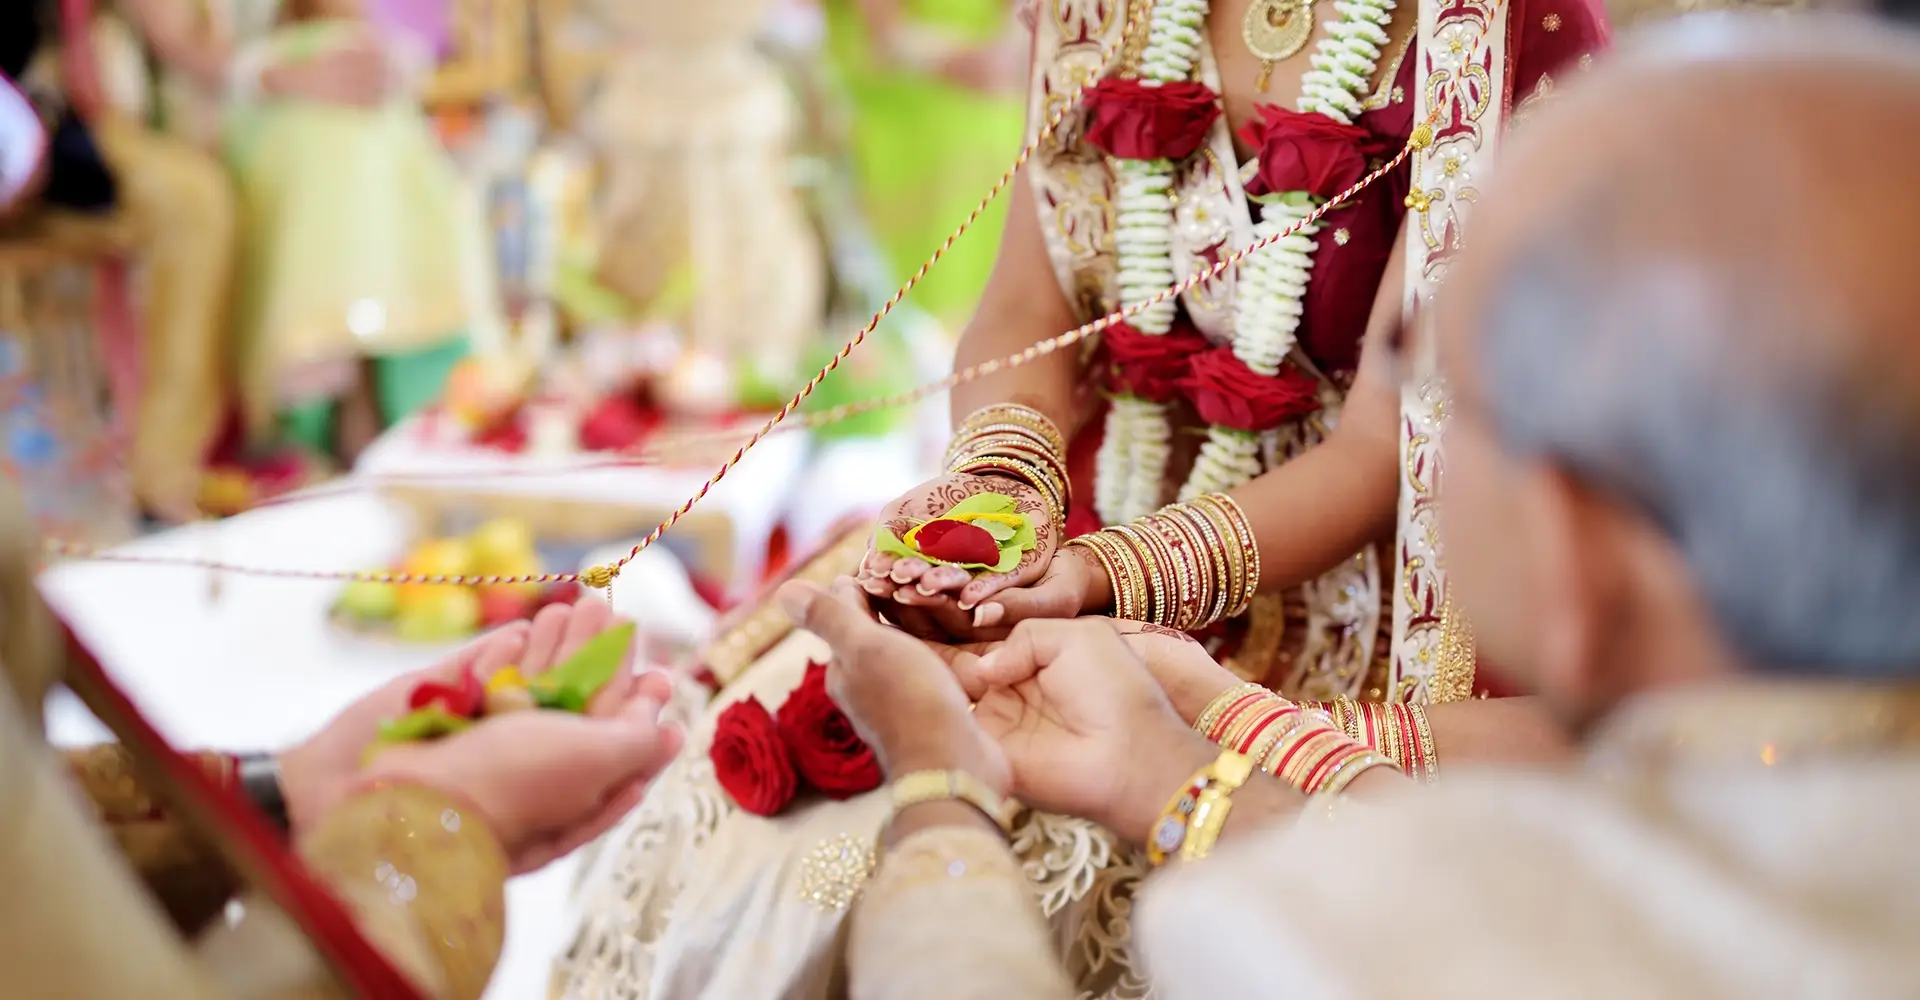 Close up of bride and groom's hands during an Indian wedding ceremany